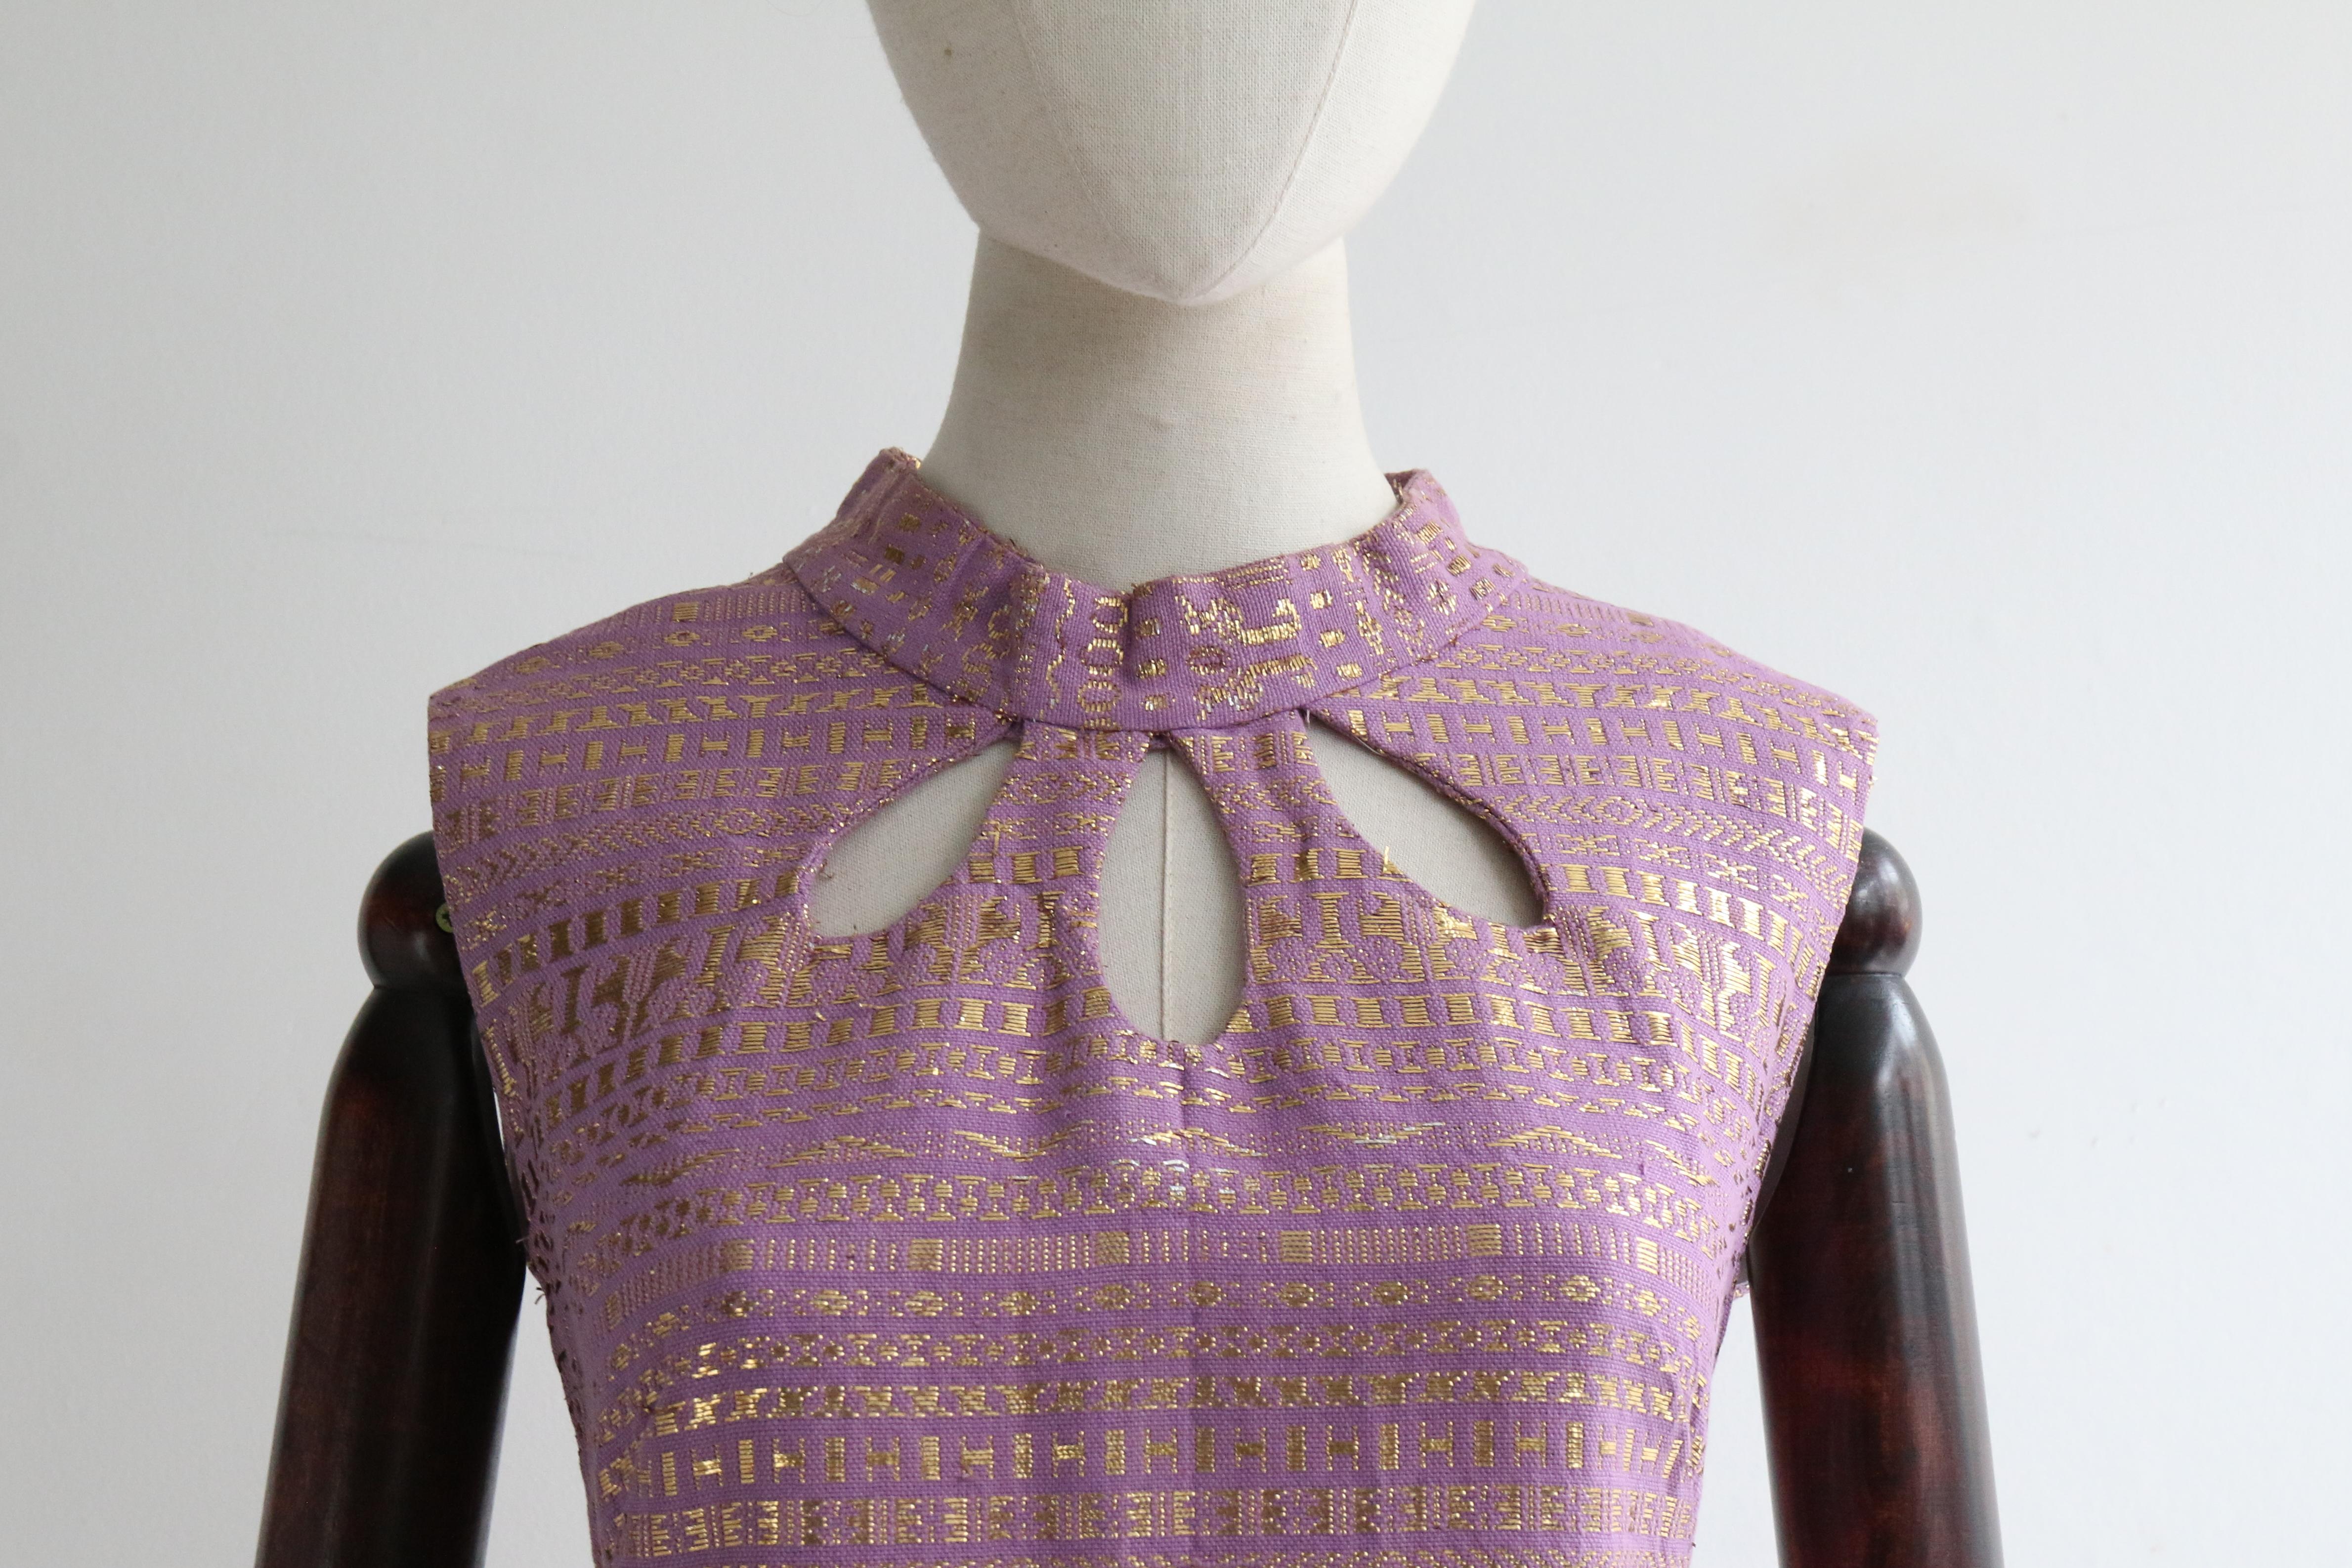 Vintage 1960's Lilac & Gold Lurex Keyhole Dress UK 12-14 US 8-10 In Good Condition For Sale In Cheltenham, GB